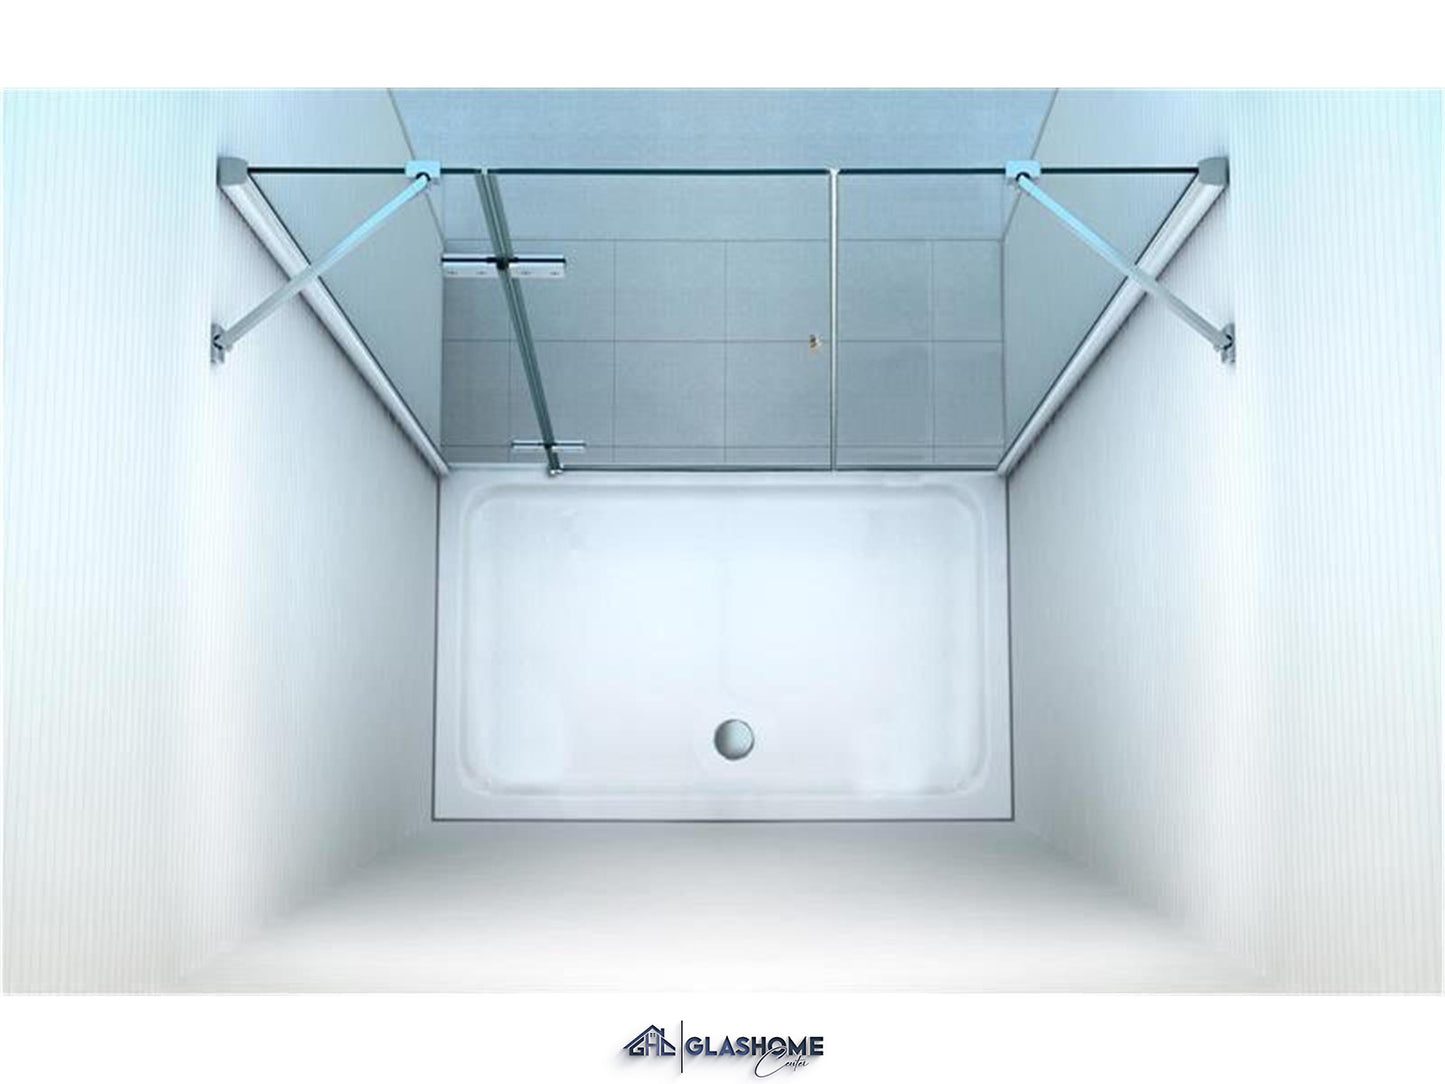 GlasHomeCenter - niche cabin New York (160 x 195 cm) - 8mm toughened safety glass - without shower tray